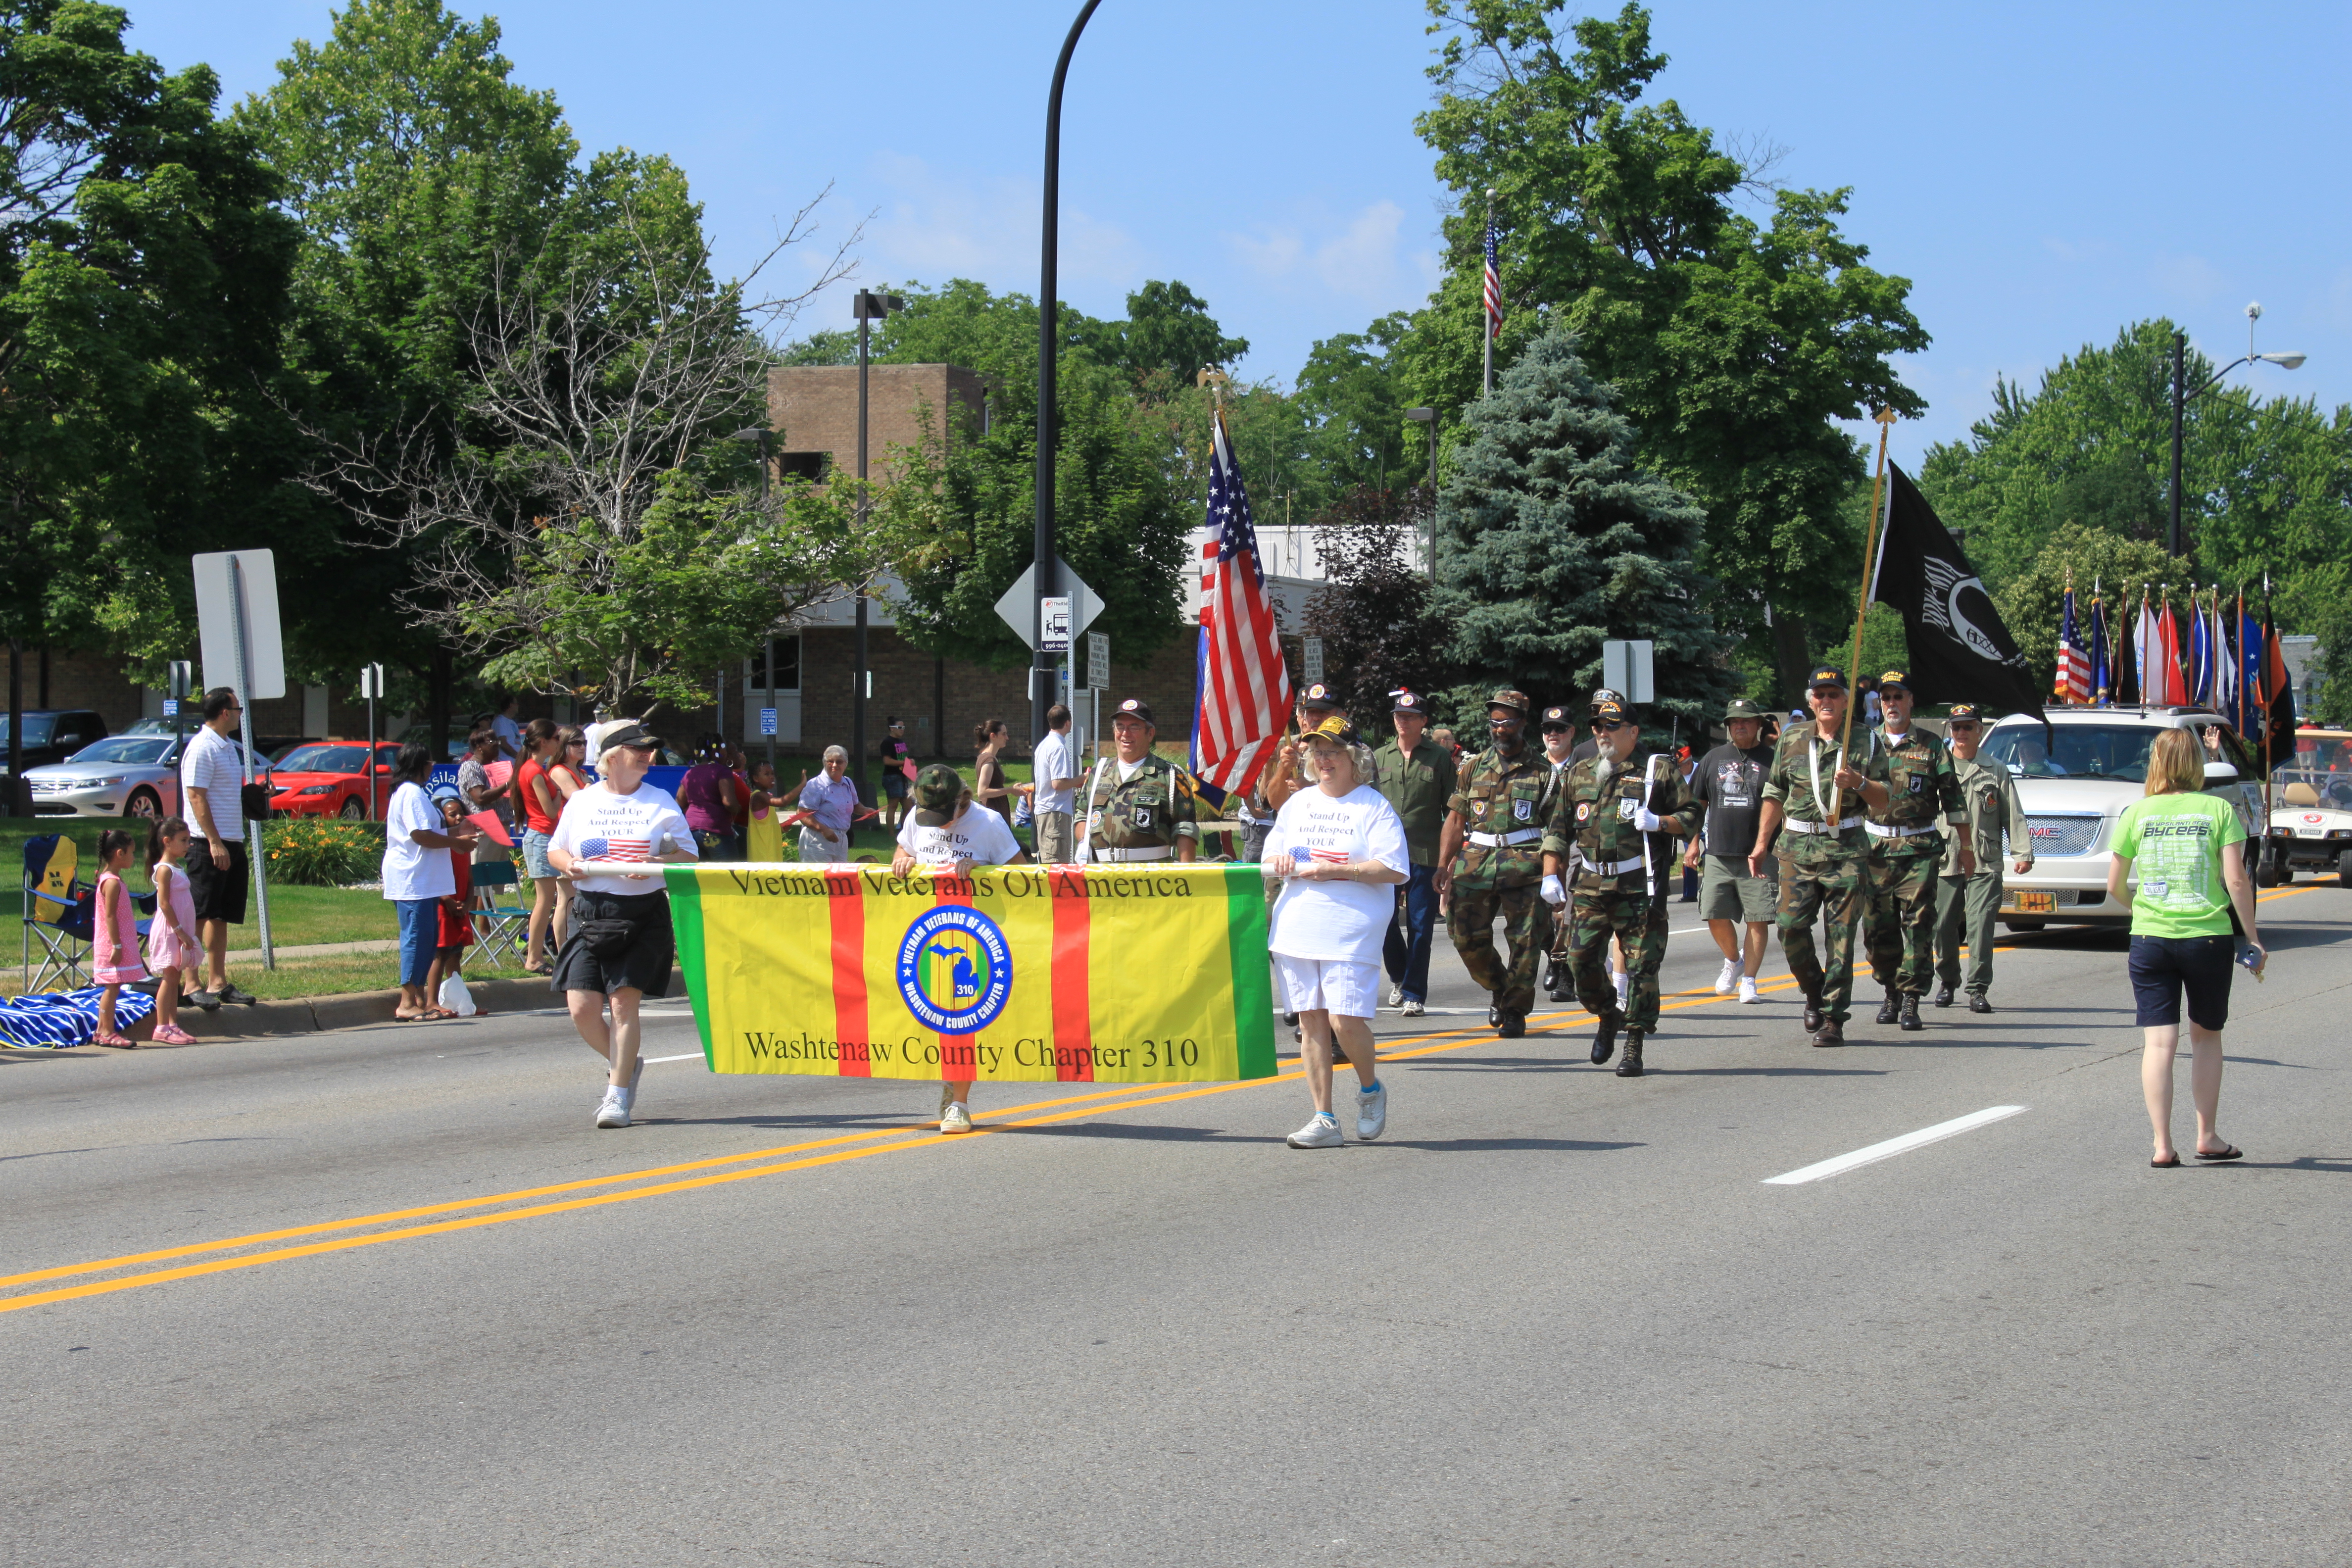 Members of the Vietnam Veterans of America marching in an Independence Day parade in Ypsilanti, Michigan. Photograph taken by Dwight Burdette on July 4, 2011.